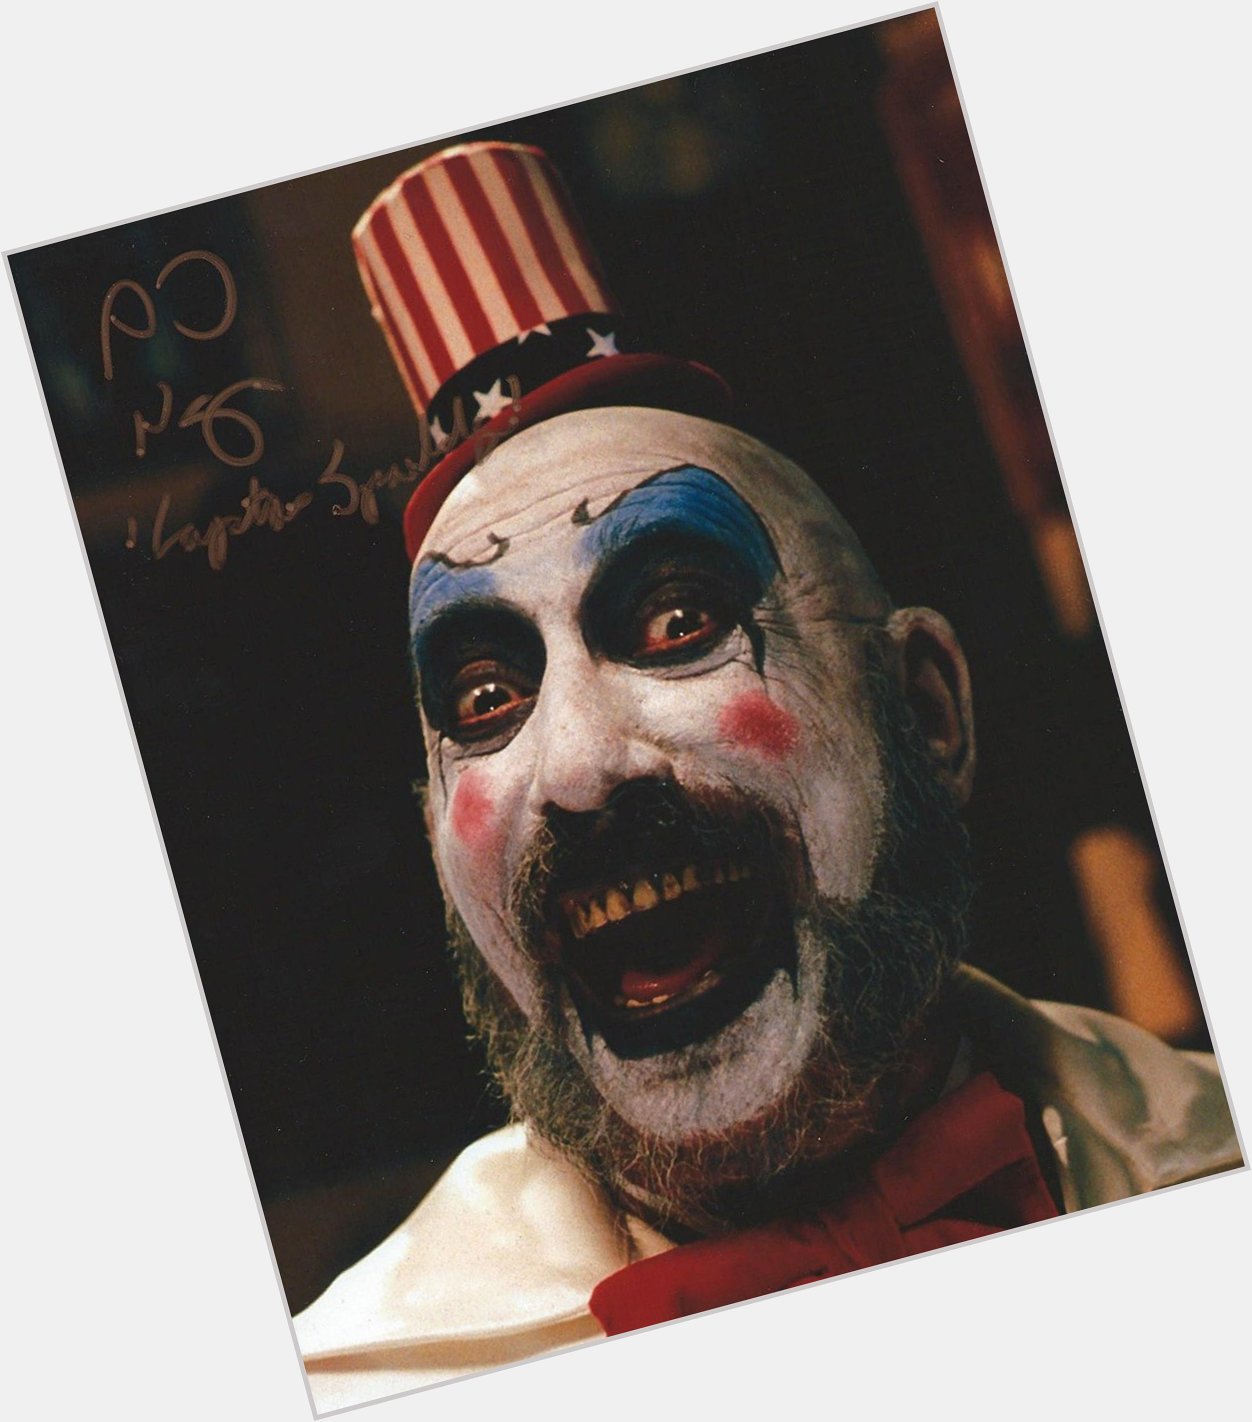 Happy 79th birthday to the one and only Sid Haig!  